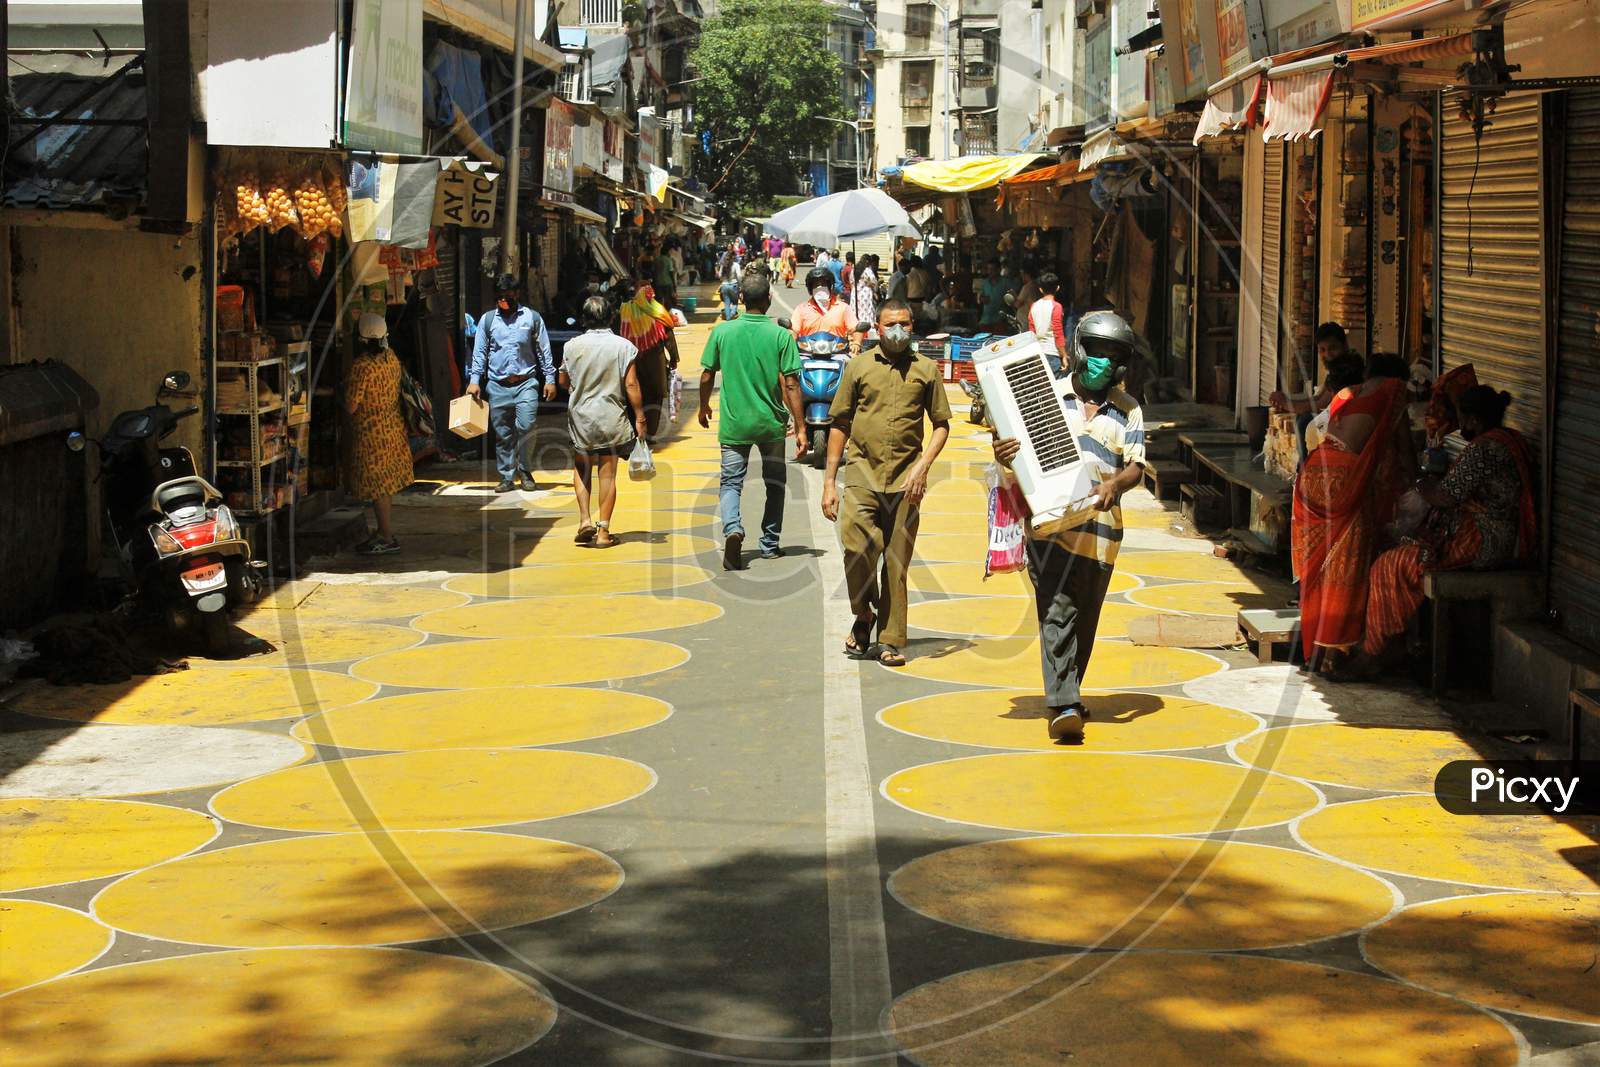 People walk on yellow circles painted for physical distancing at a residential-cum-market area, in Mumbai, India on June 29, 2020.